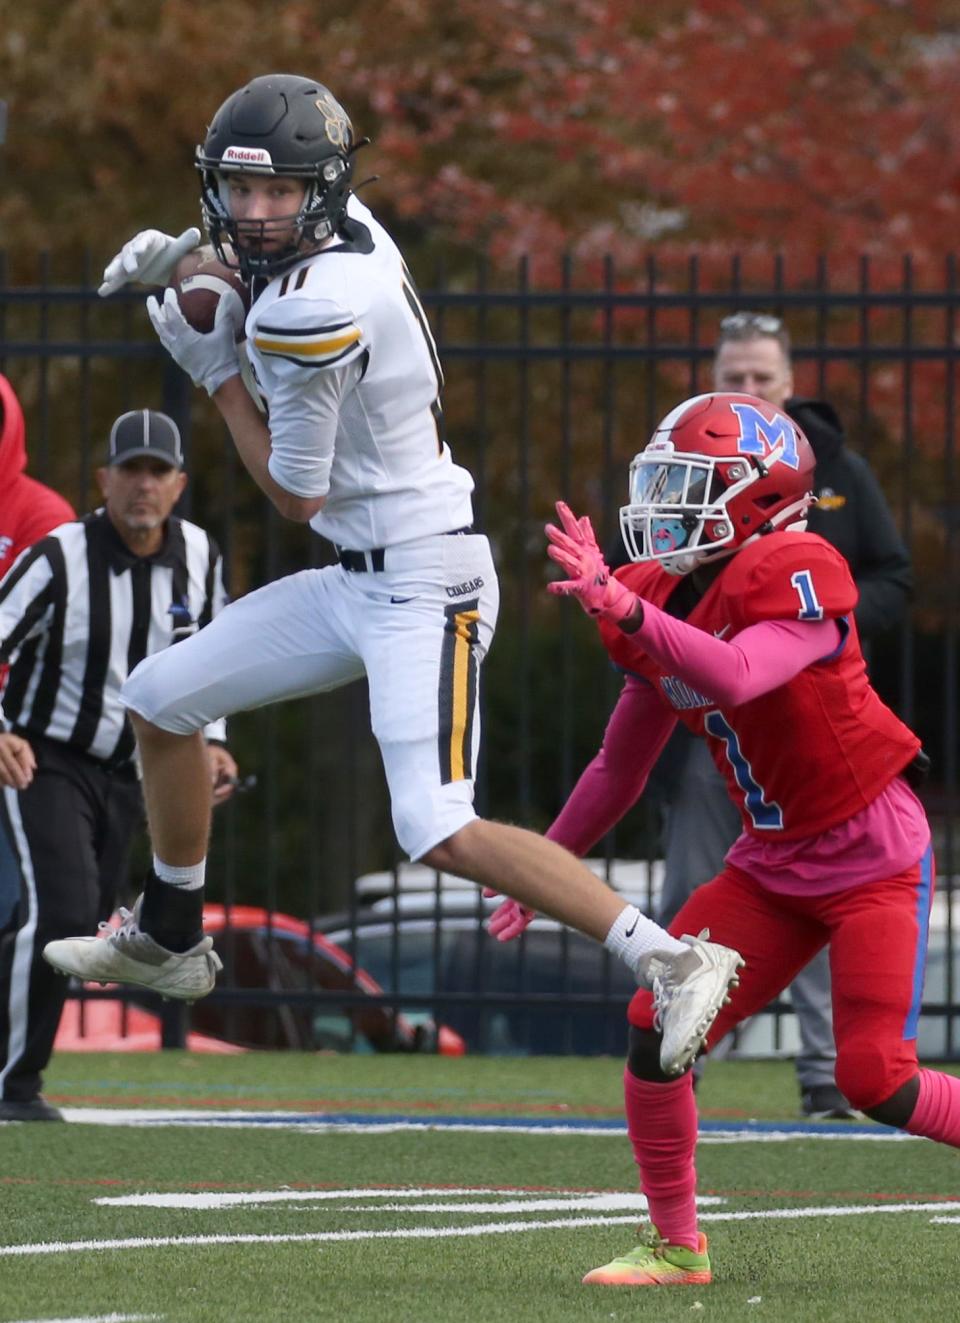 Honeoye Falls-Lima wide receiver Andrew Wanzenried (11) goes up for the reception over Monroe defensive back Styhles McKenzie-Baker (1) in the first half during their game Saturday, Oct. 8, 2022 at James Monroe High School in Rochester. 